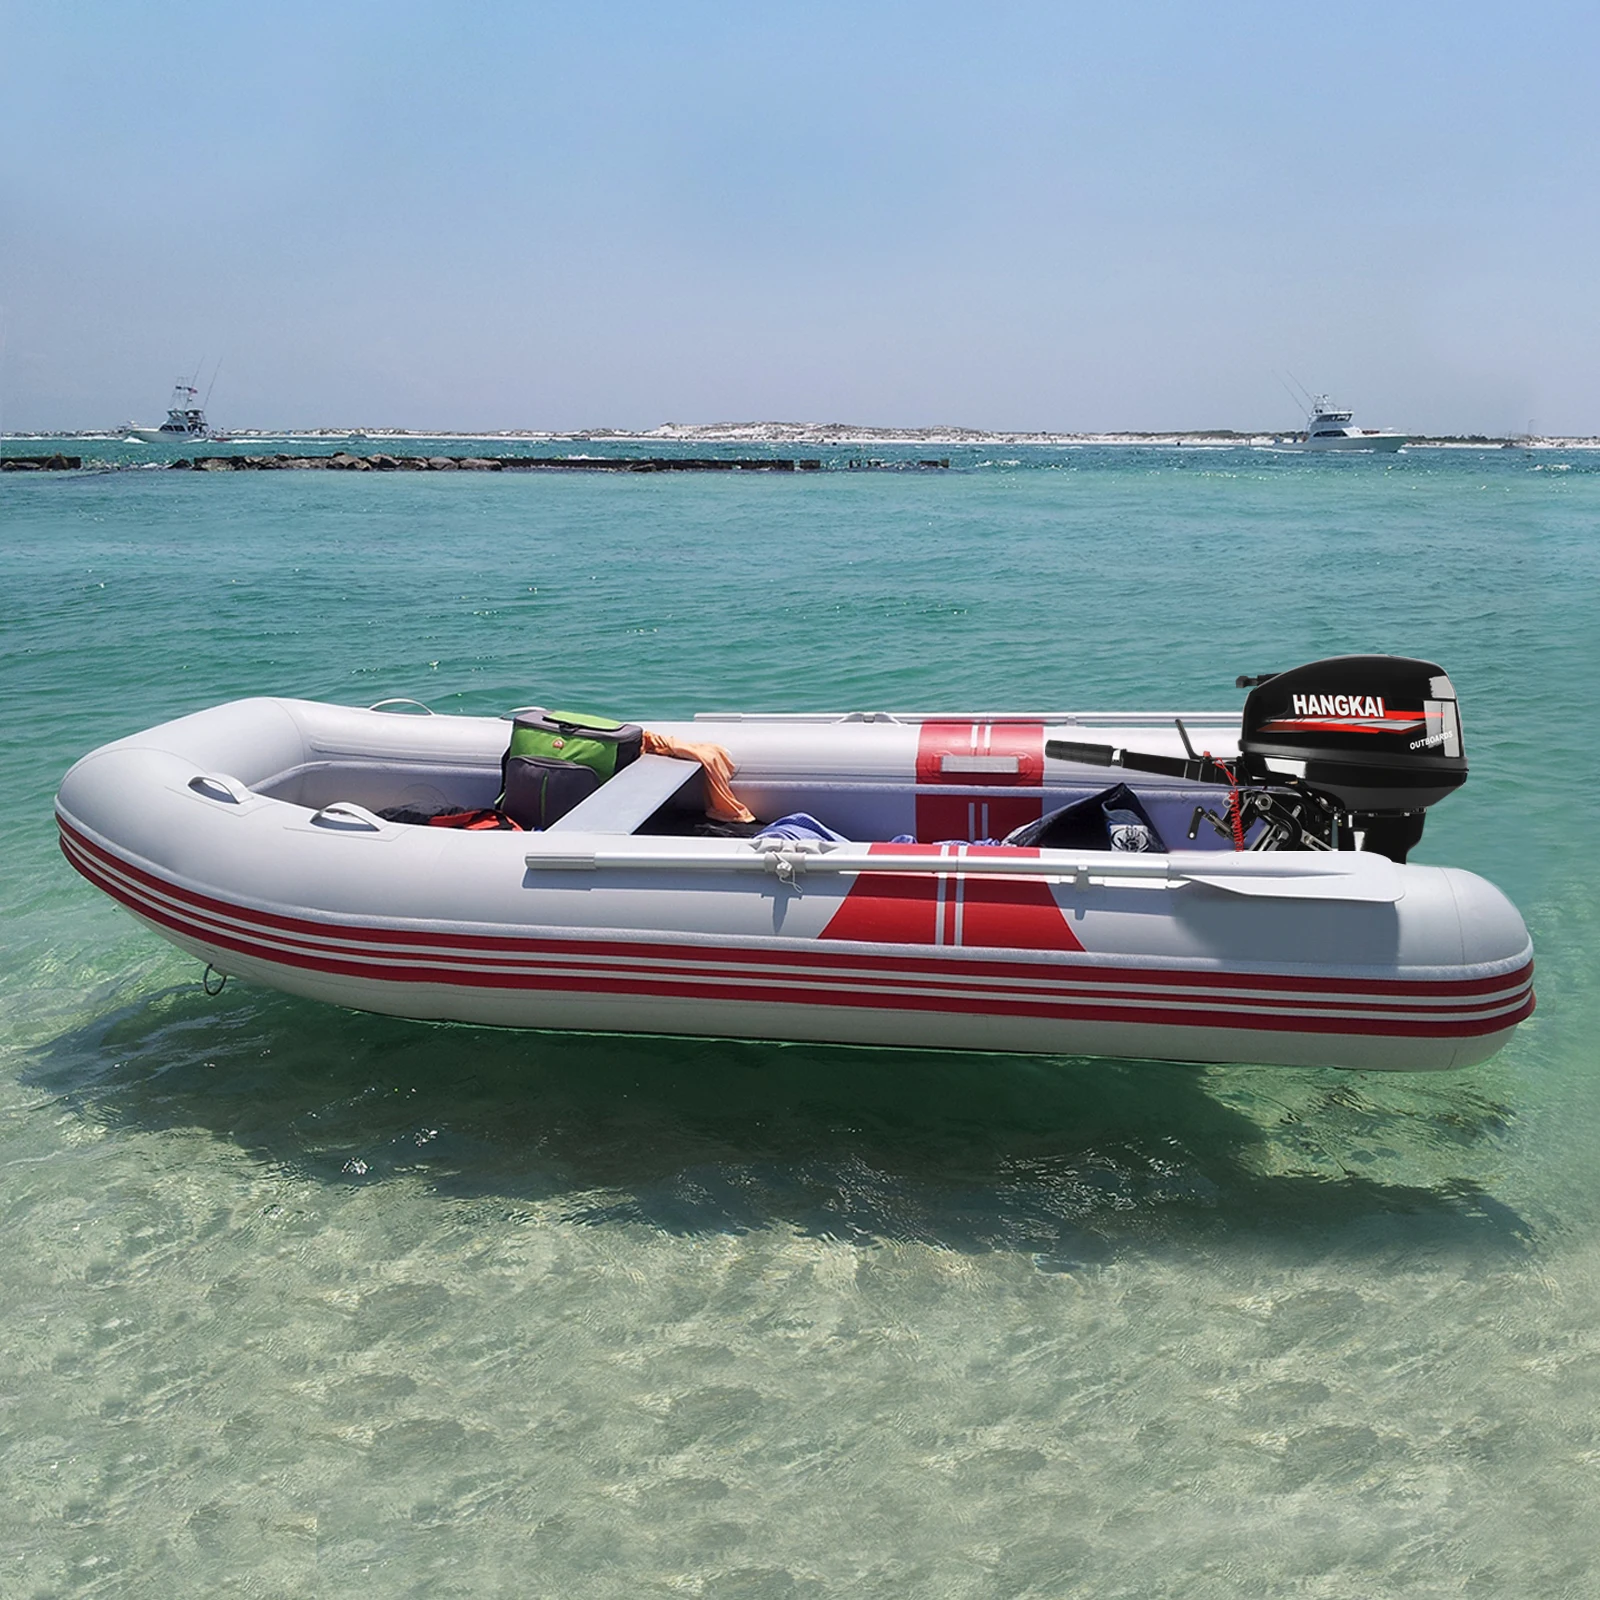 Hangkai 18 HP Boat Outboard Motor Long Shaft, 2 Strokes Inflatable Gasolina Boat Outboard Engine,Water Cooling System maytech 65162 sensored and sensorless electric inboard boat motor ip68 for water scooter inflatable jet surfboard